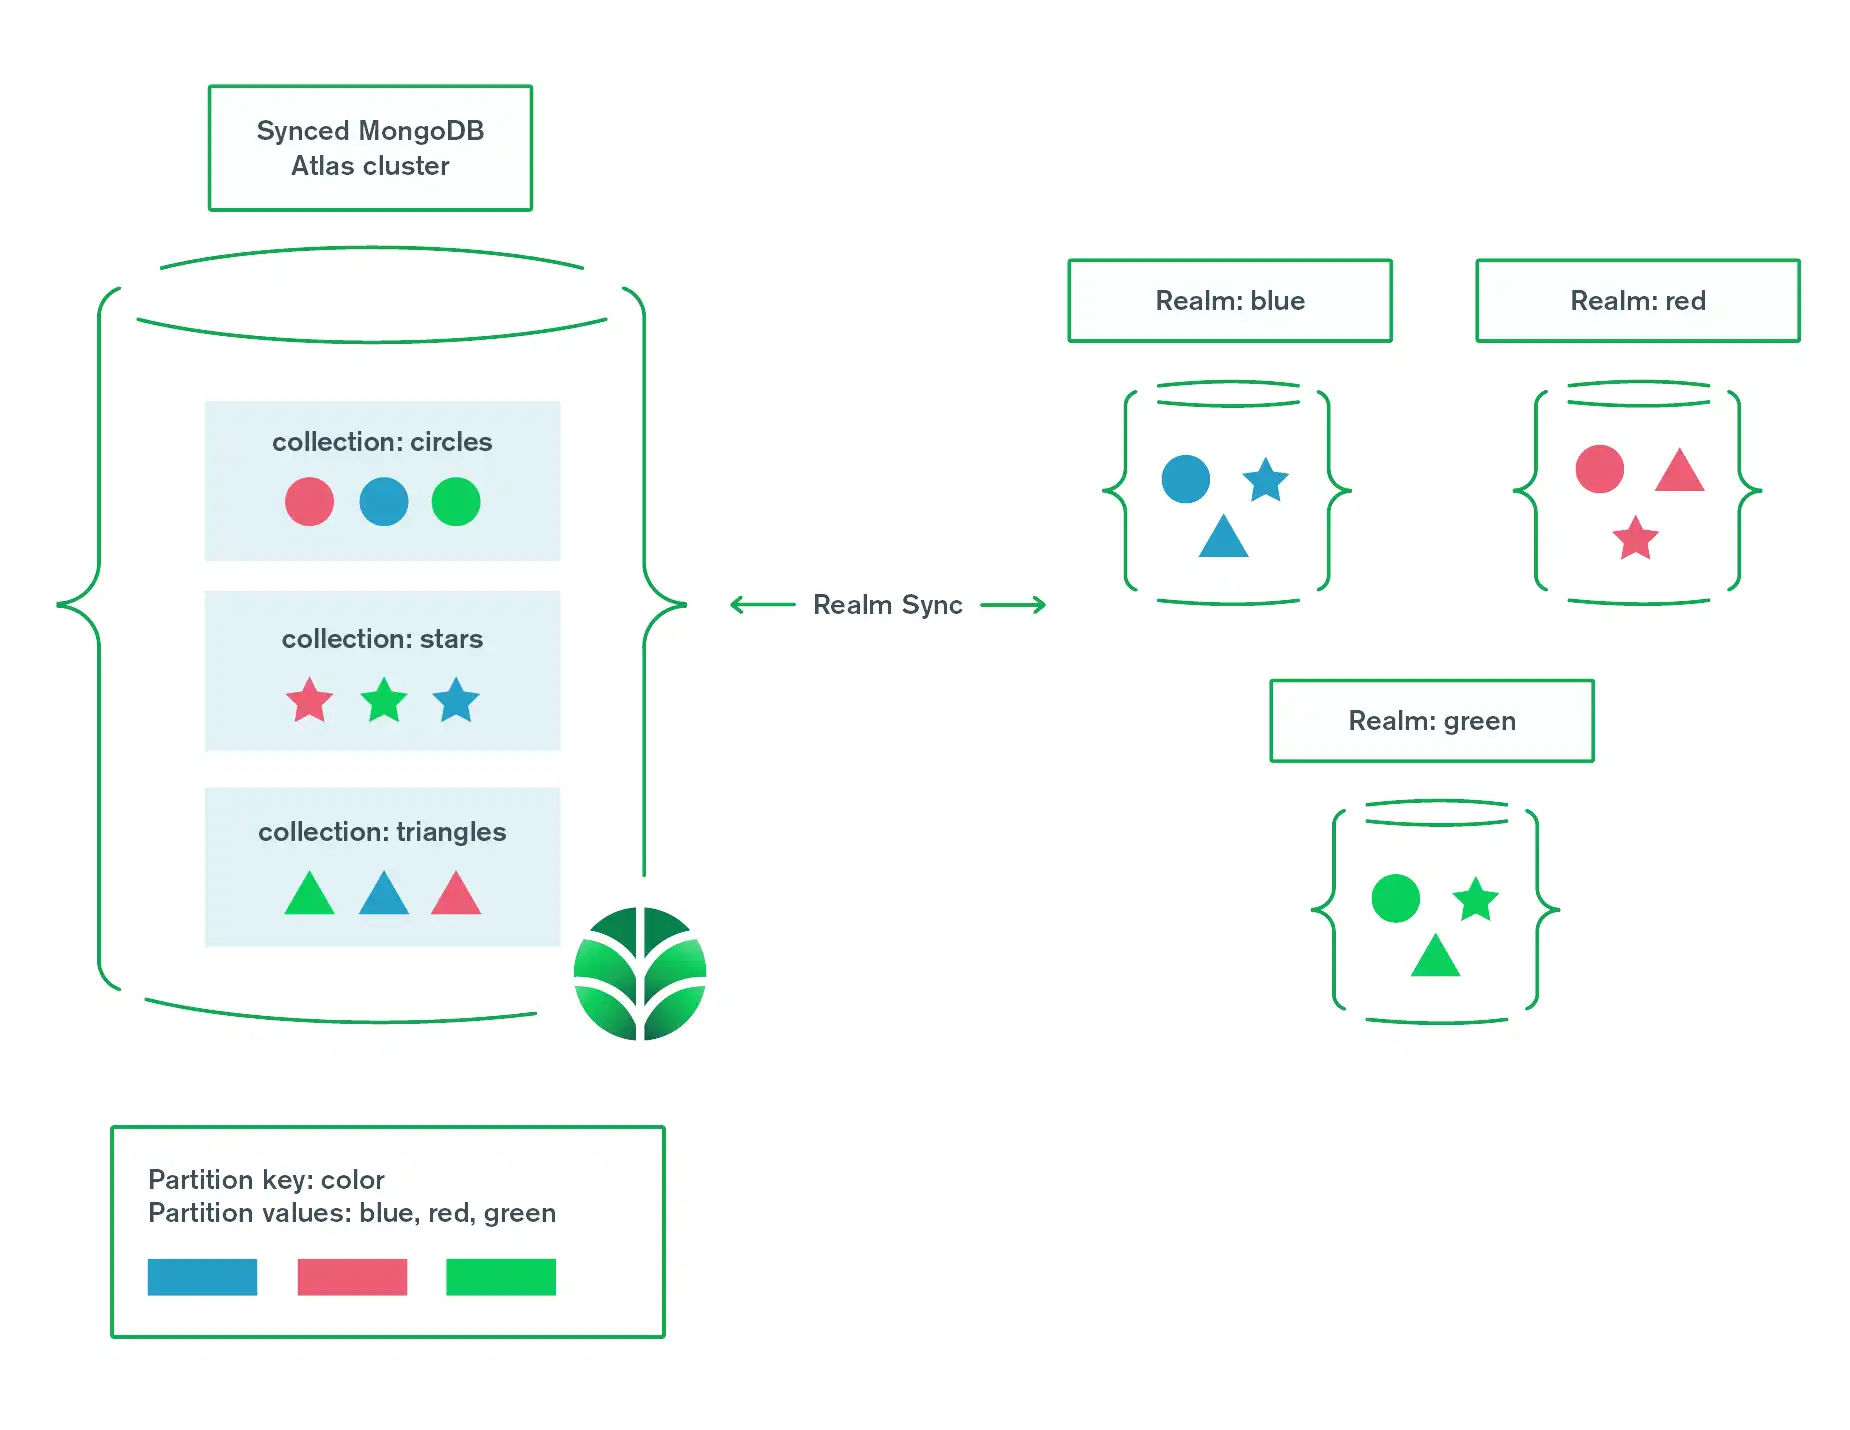 A diagram that explains partitioning using groups of shapes and colors. MongoDB collections group by shape (equivalent to object types) while realms group by color (equivalent to partition value).